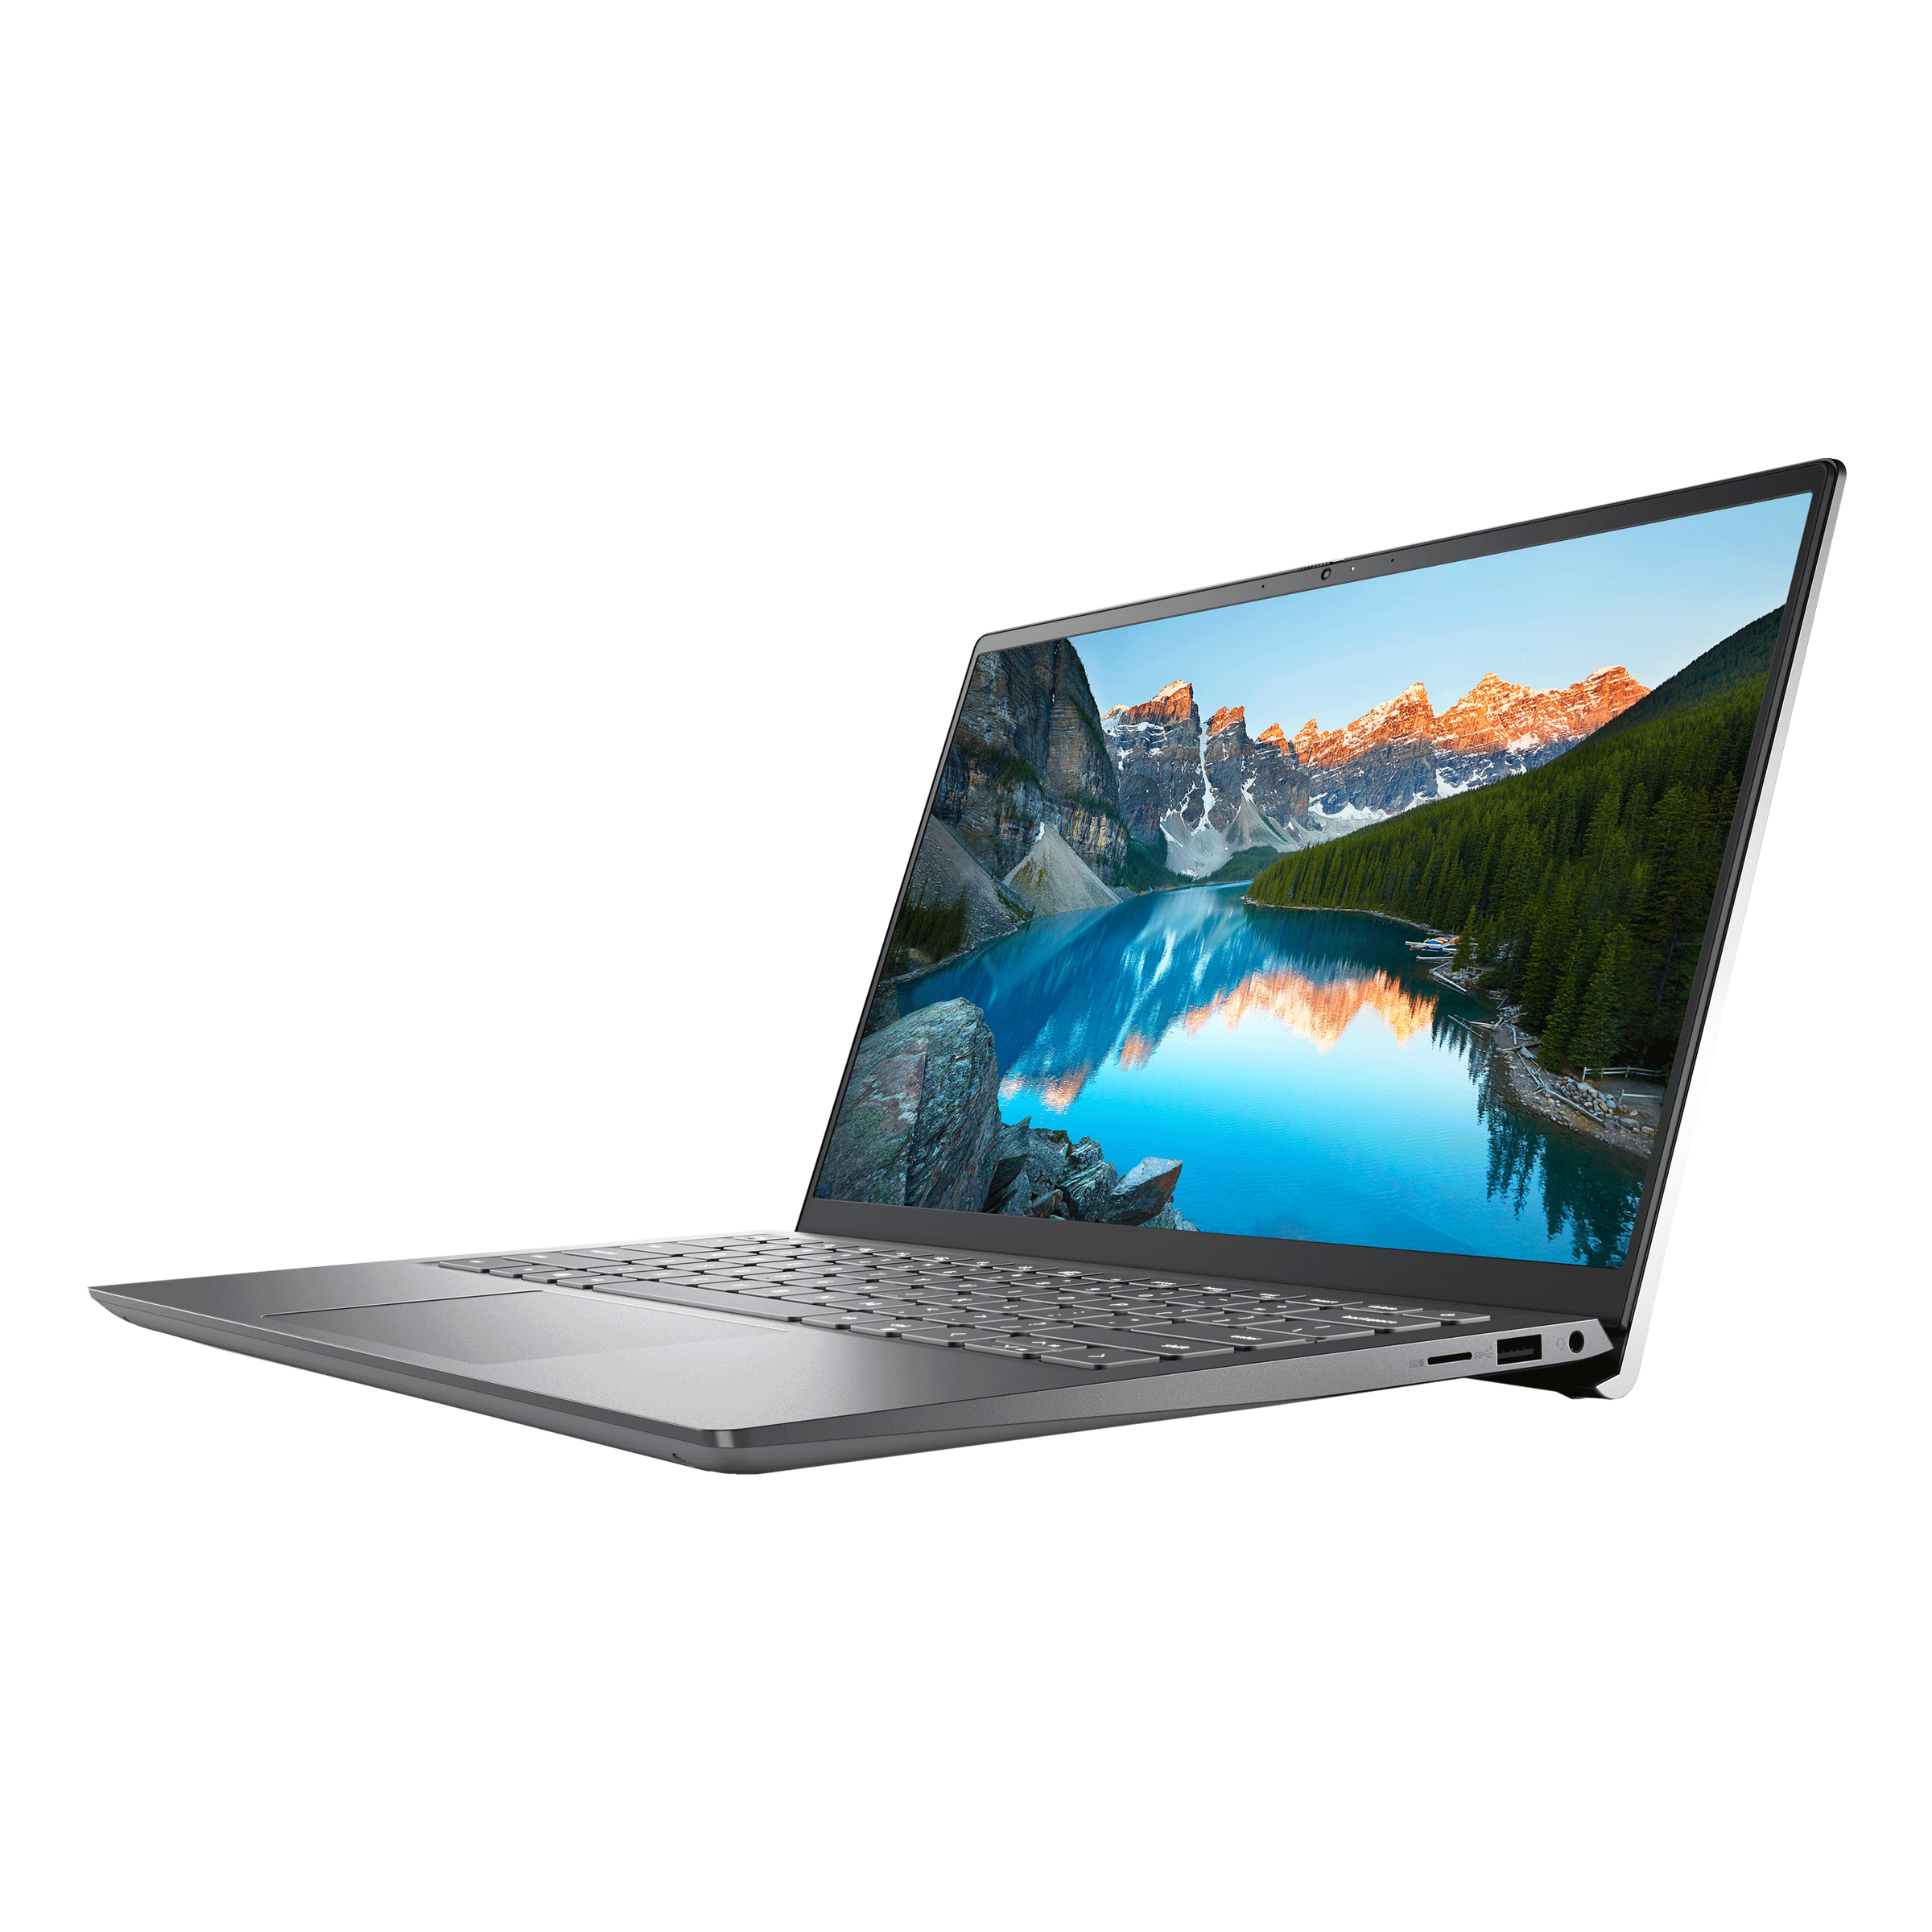 Dell Inspiron 5410 Intel Core i5 11th Gen (14 inch, 8GB, 512GB, Windows 10, MS Office 2019, NVIDIA GeForce MX350 Graphics, FHD IPS Display, Silver Metal, D560468WIN9S)_3